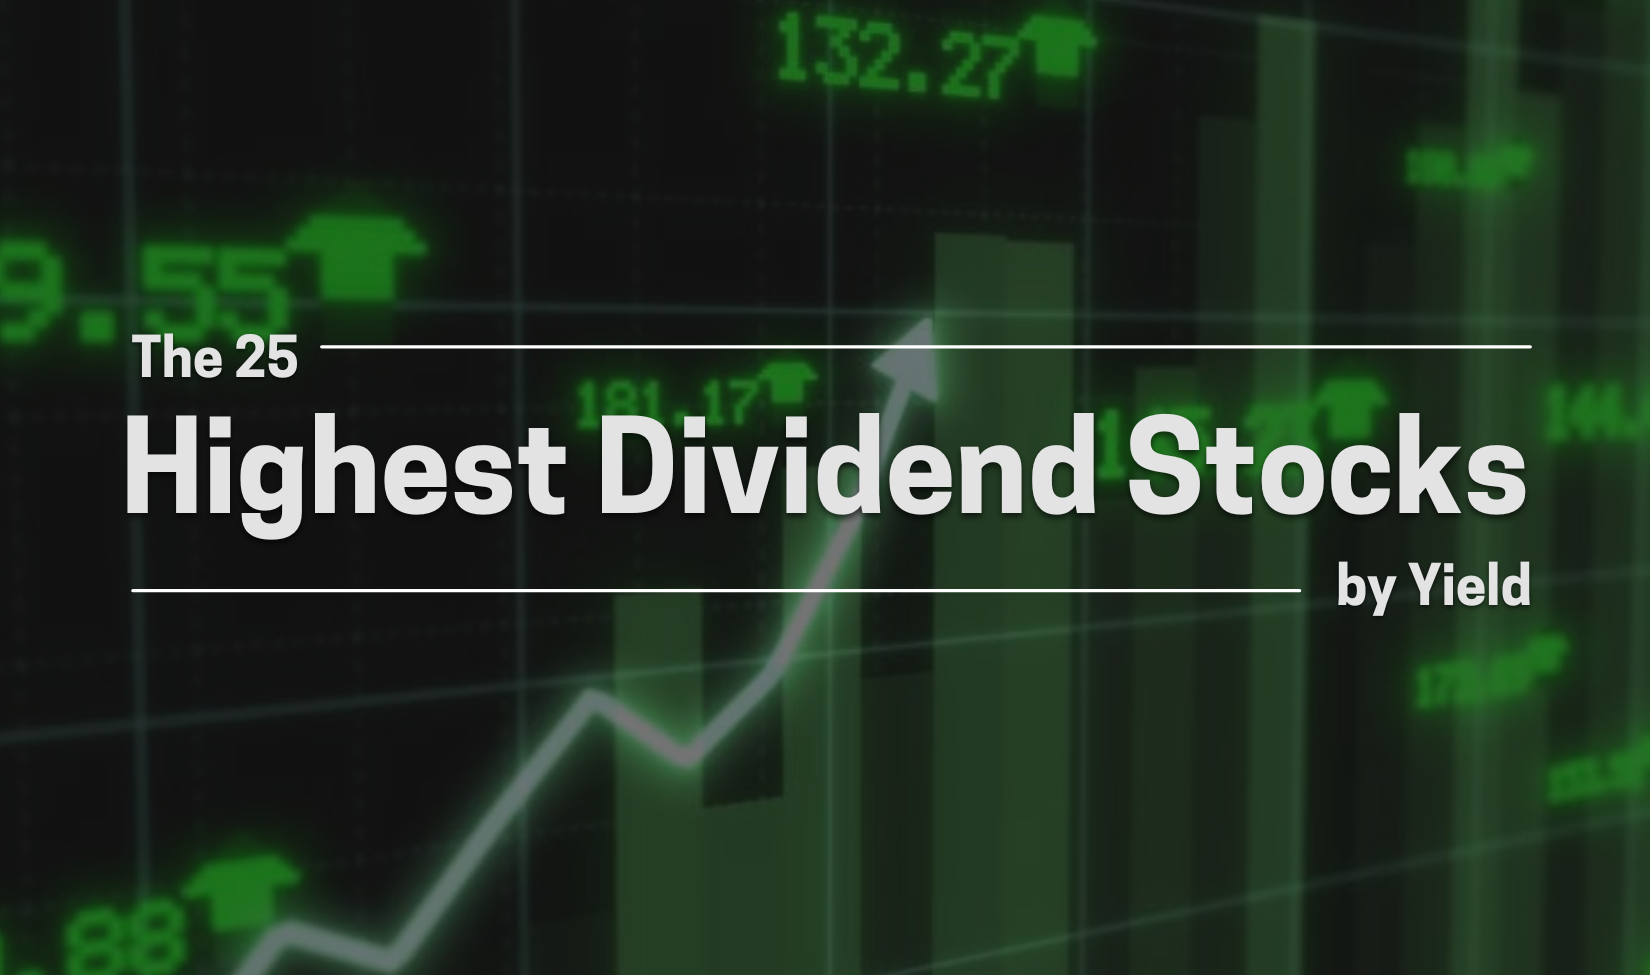 The 25 Highest Dividend Stocks by Yield